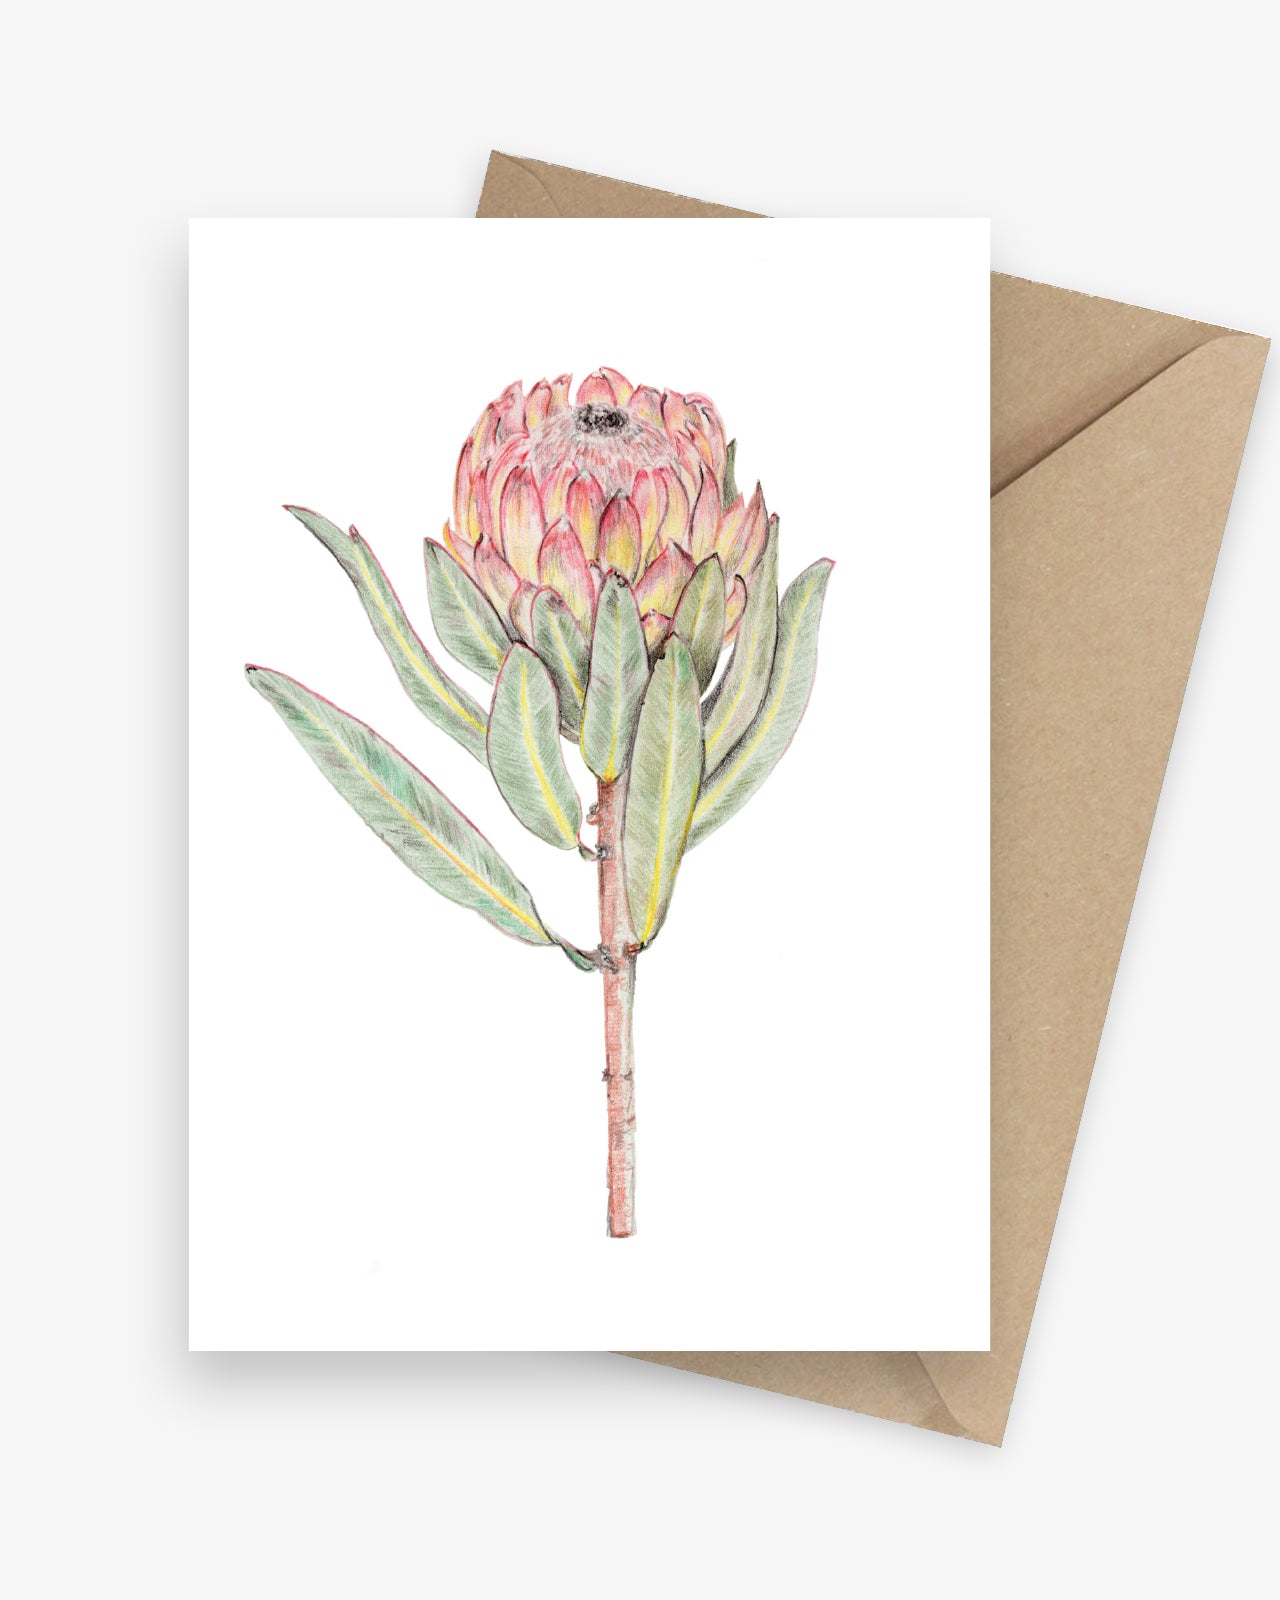 Greeting card featuring a protea flower.